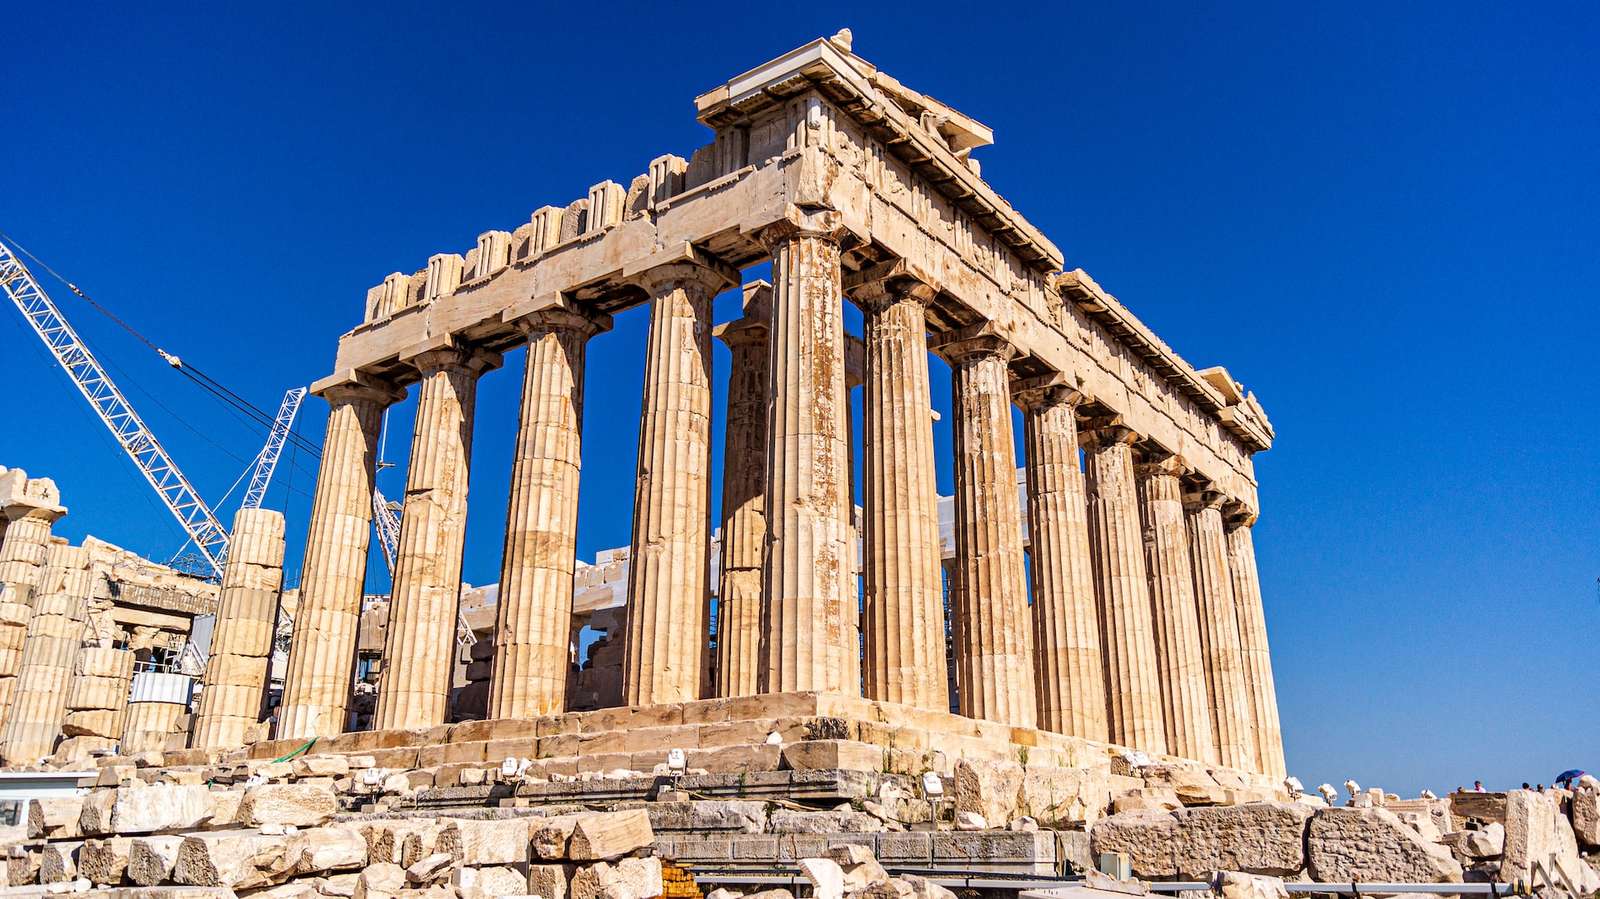 Acropolis, Greece puzzle online from photo